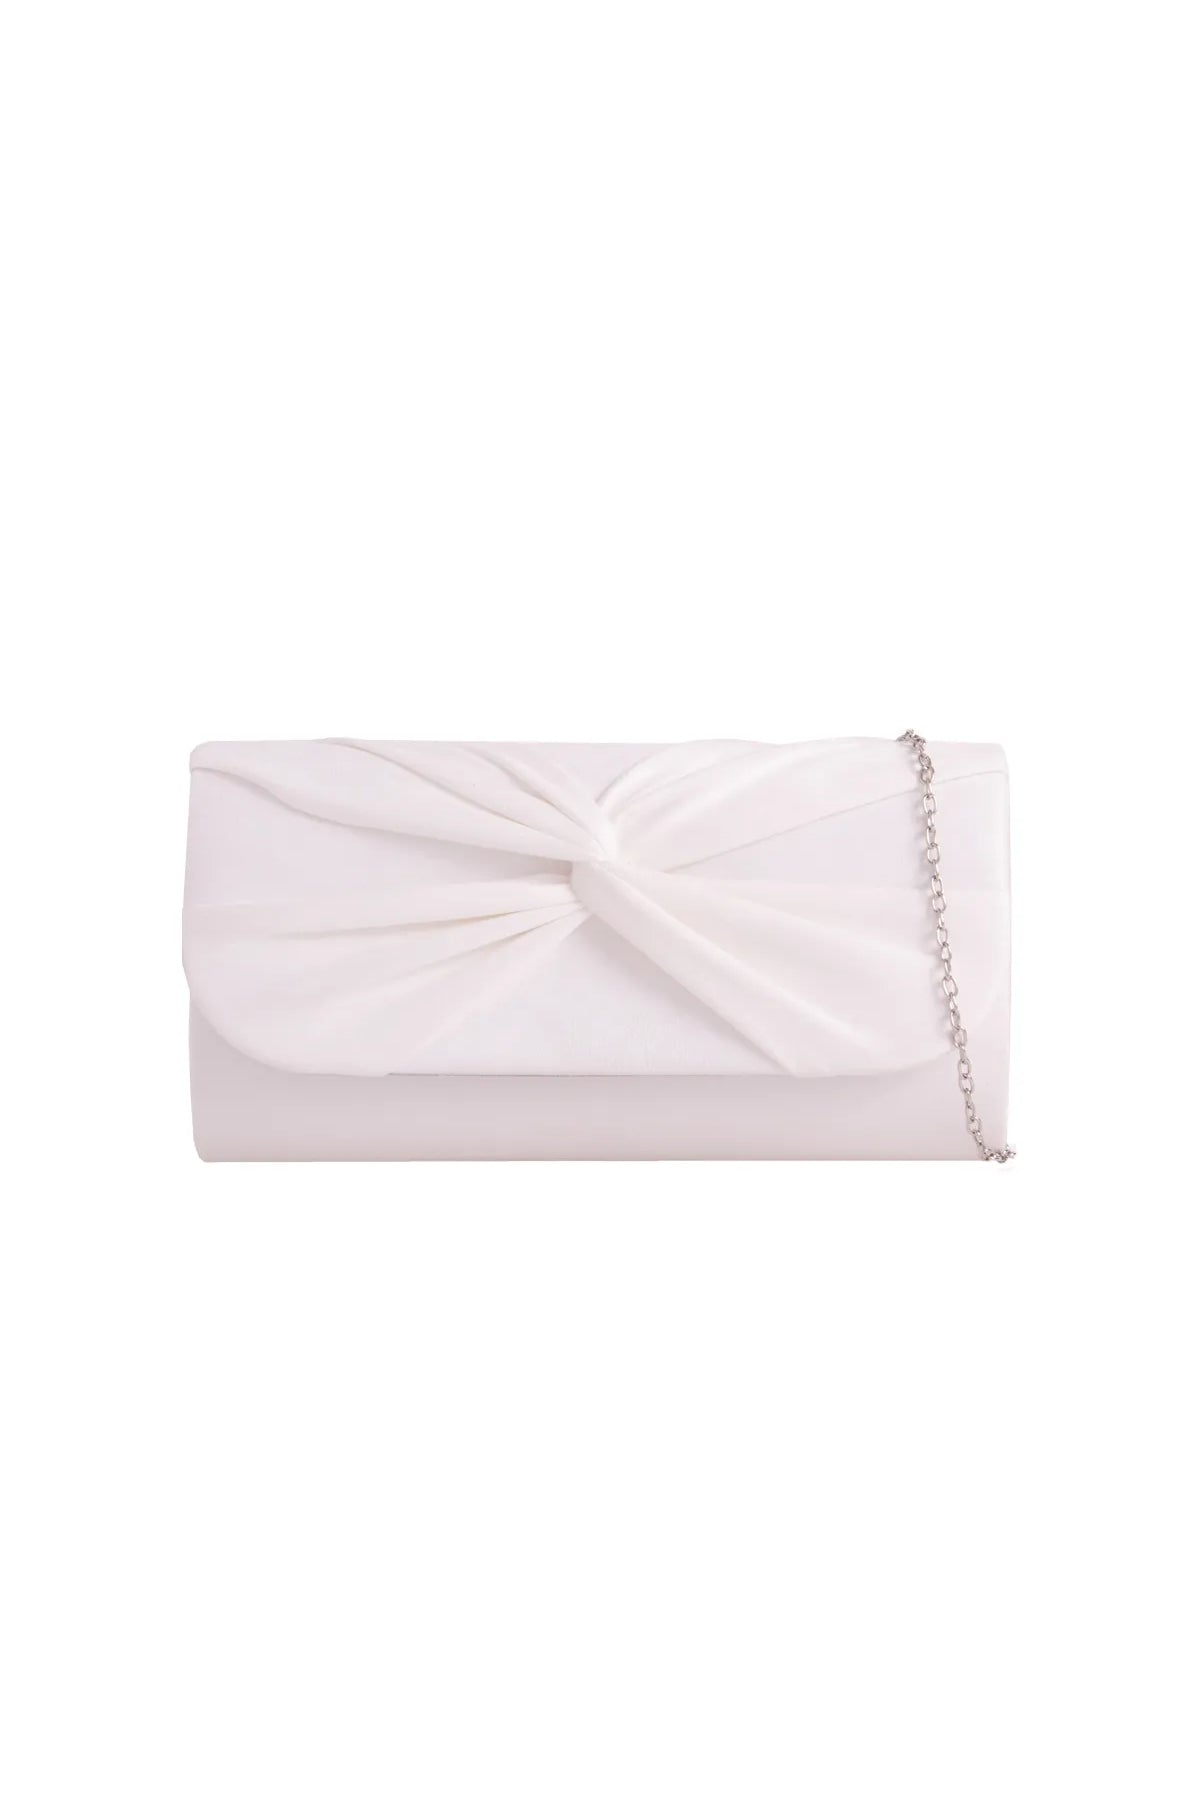 White Suede Clutch Bag with Knot Detail